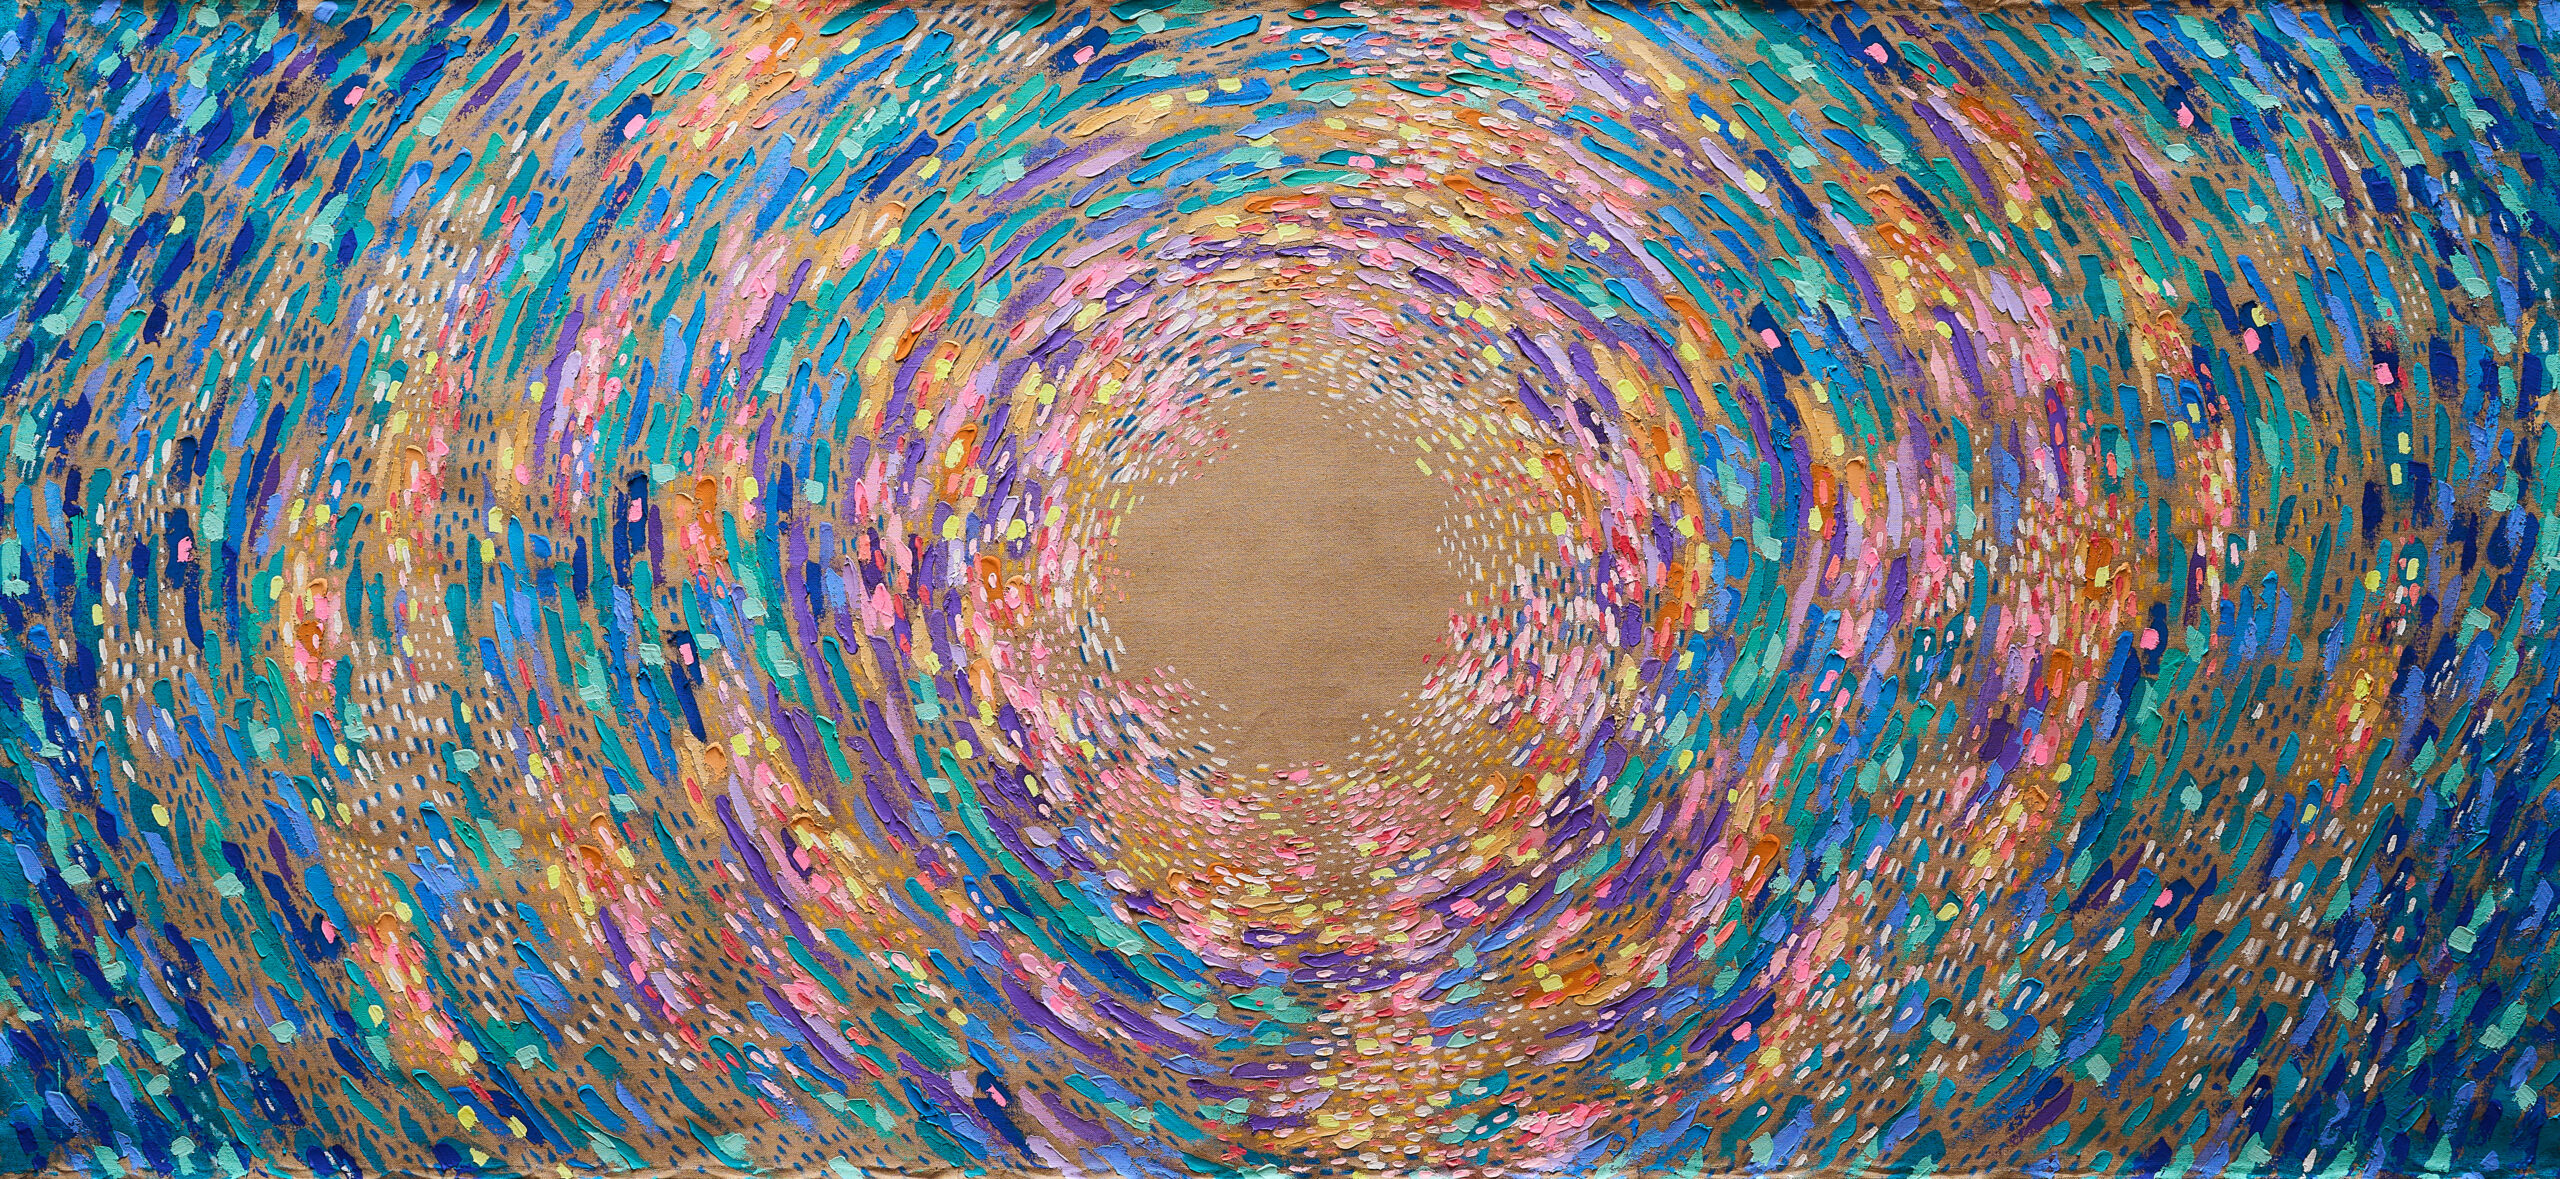 A spiral of colourful paints decorating a brown canvas